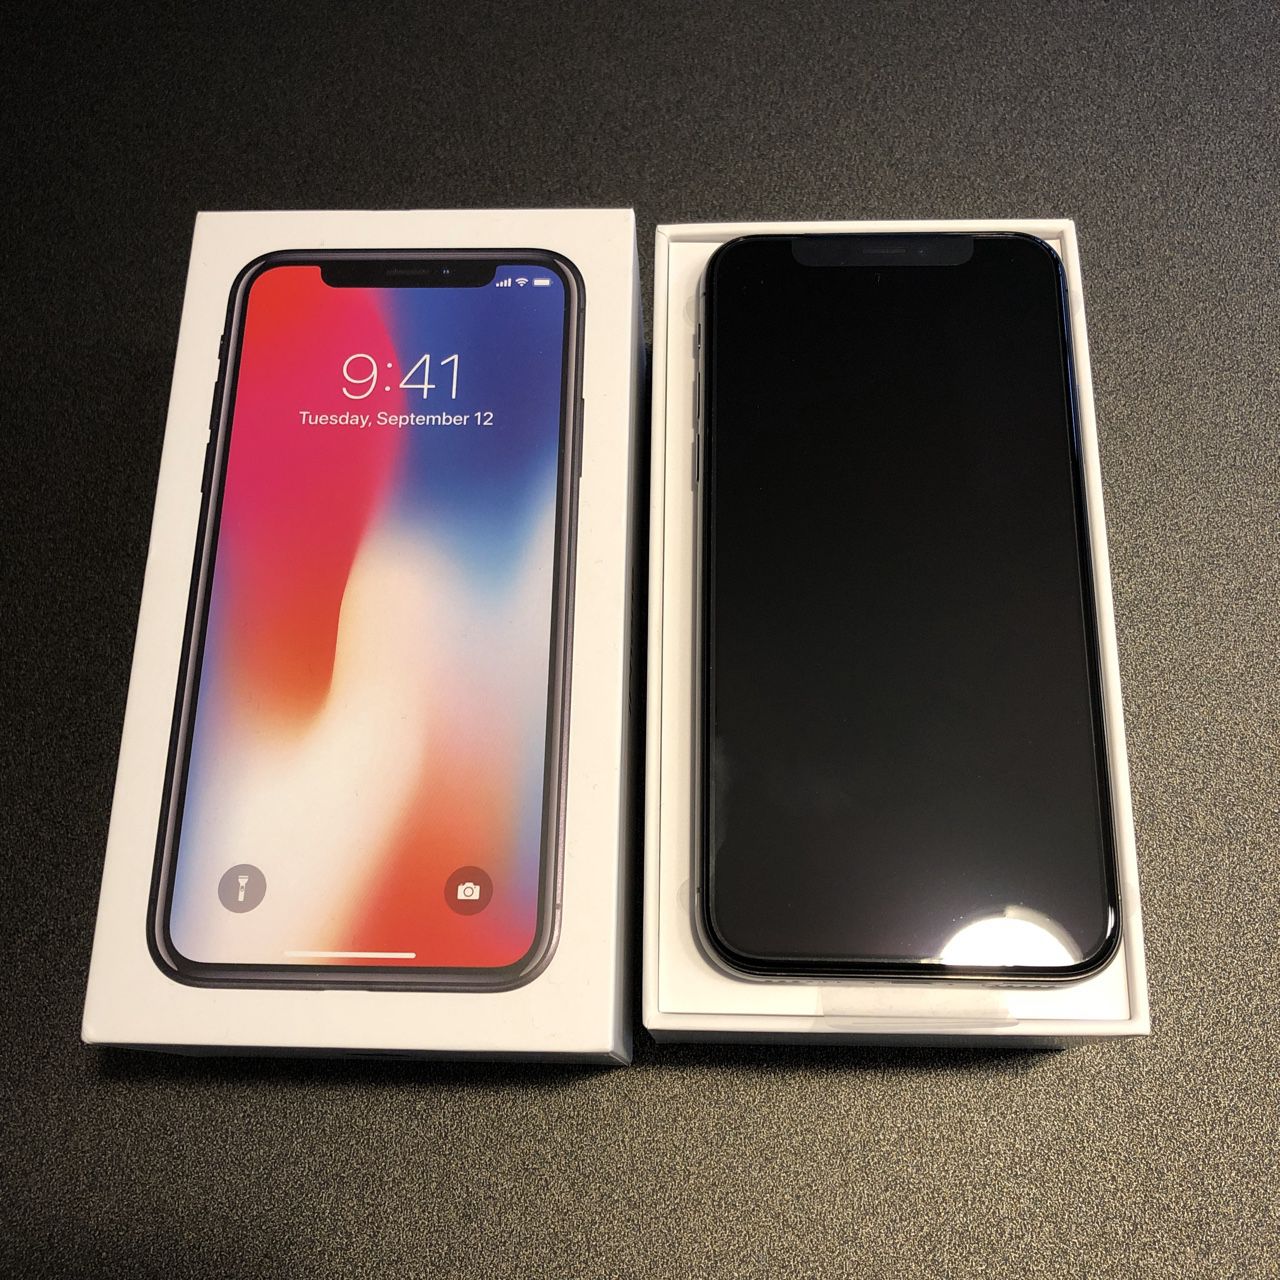 IPHONE X 64 GB GRAY FACTORY UNLOCKED WITH BOX AND ACCESSORIES